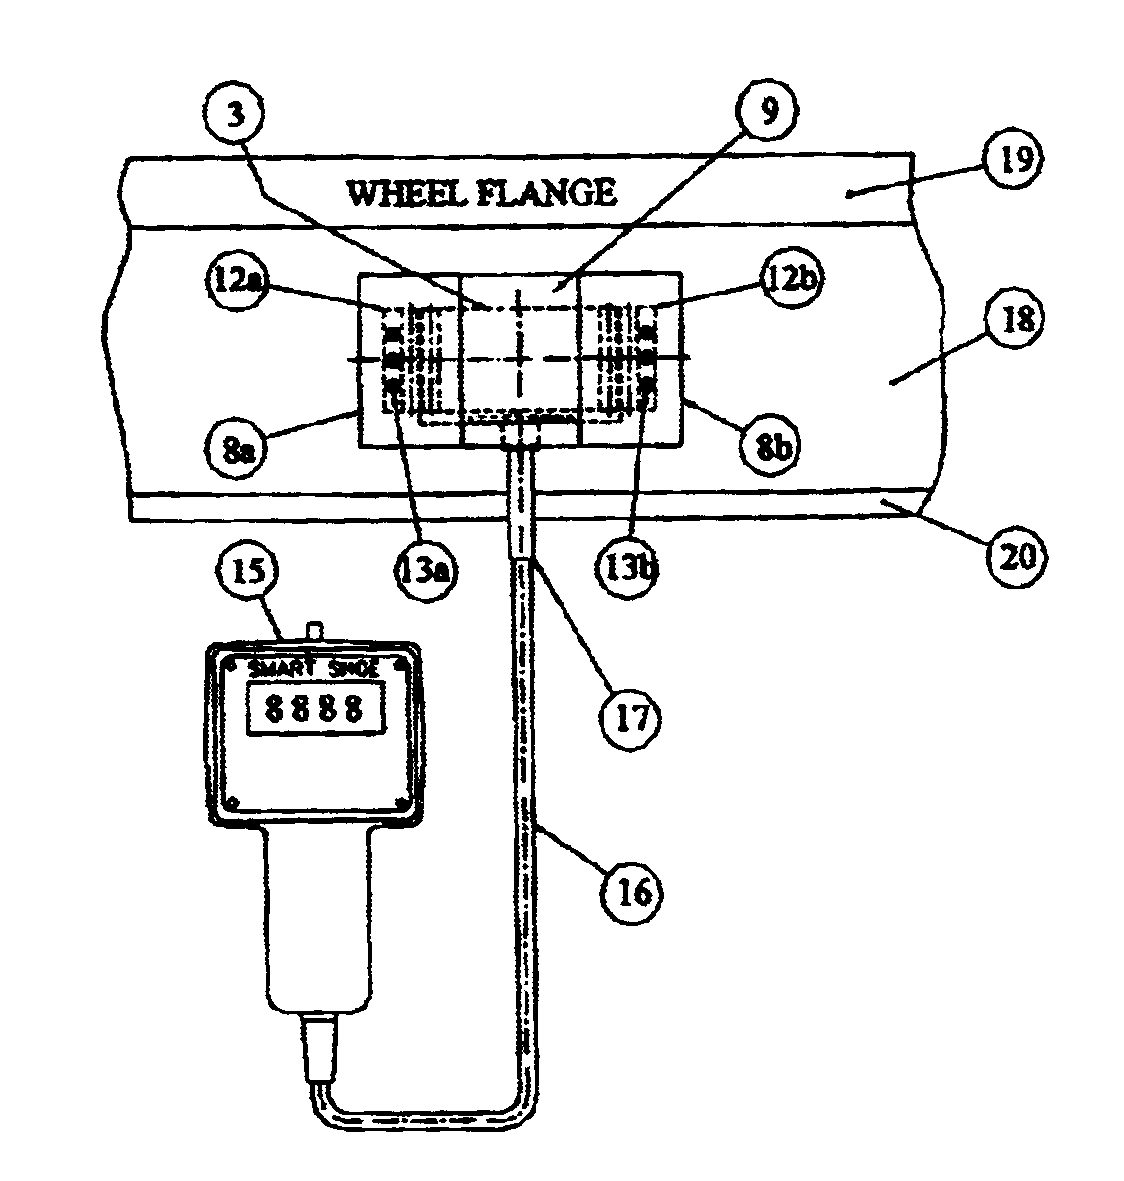 Method and device to measure the brake force for railroad vehicles